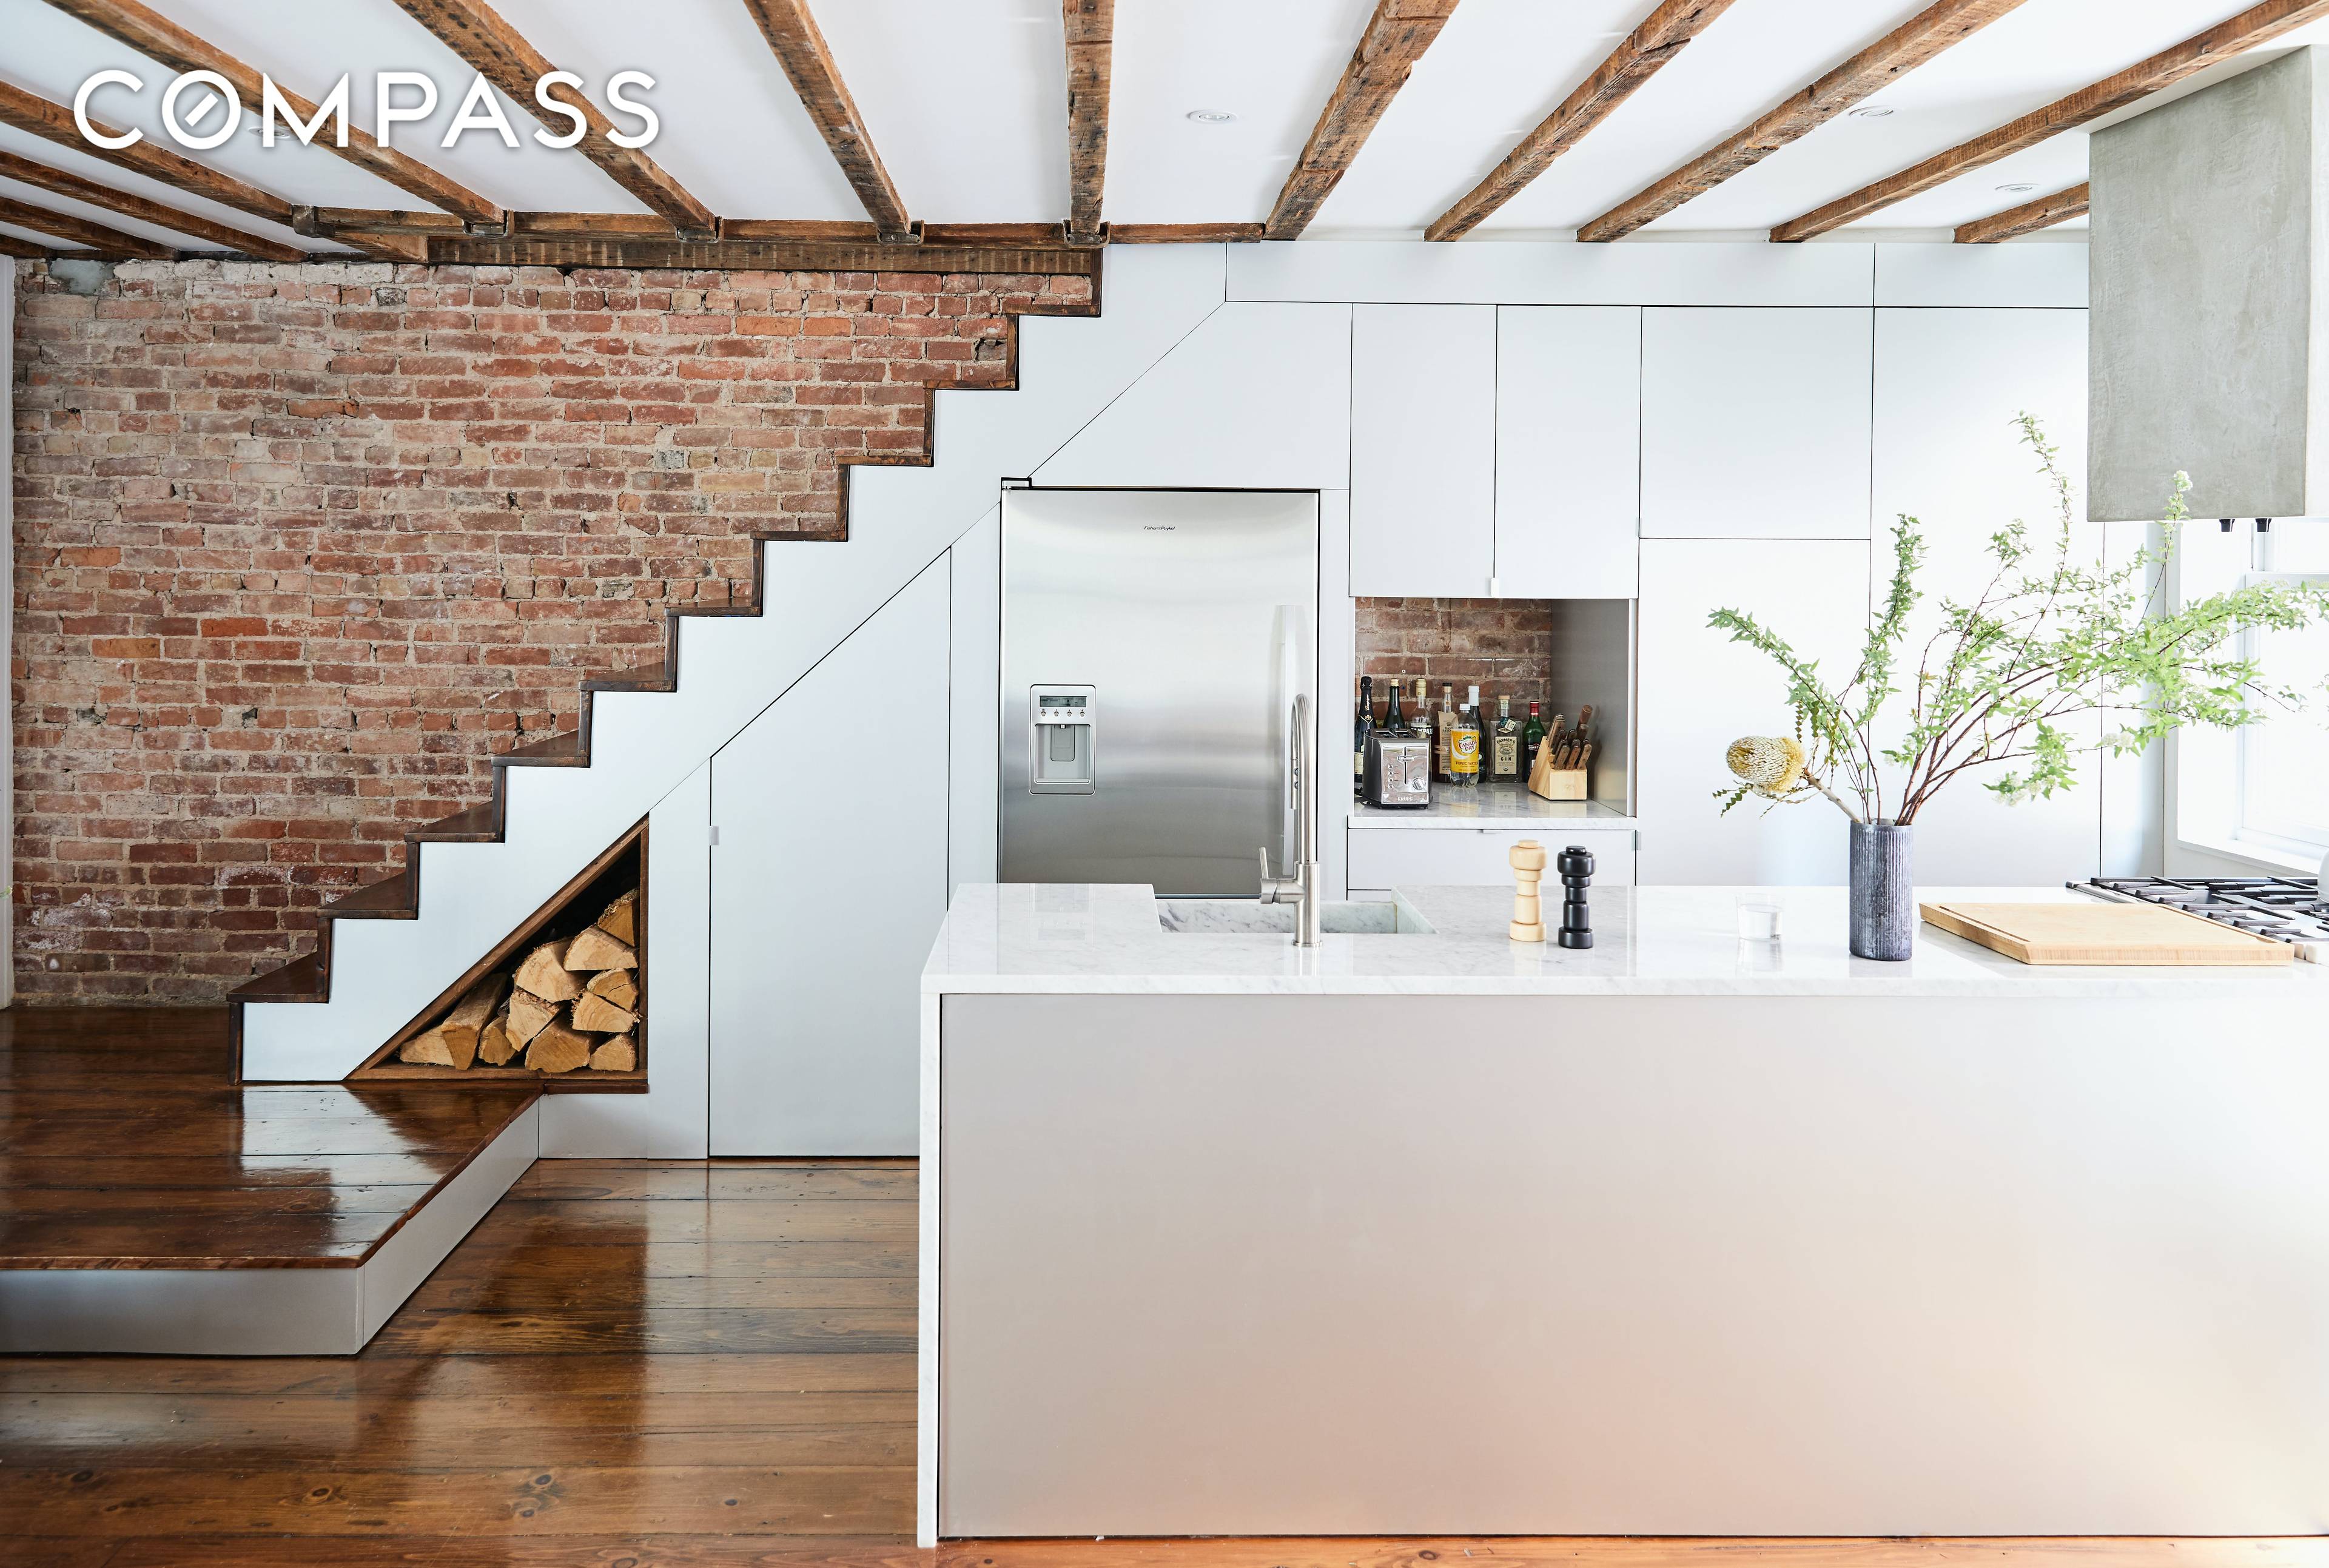 8 Sylvan Terrace Historic 1887 row house Meticulously renovated top to bottom Legal two family, currently configured with a single family layout _______________________________________________________________________ A celebrated designer's own sought aft